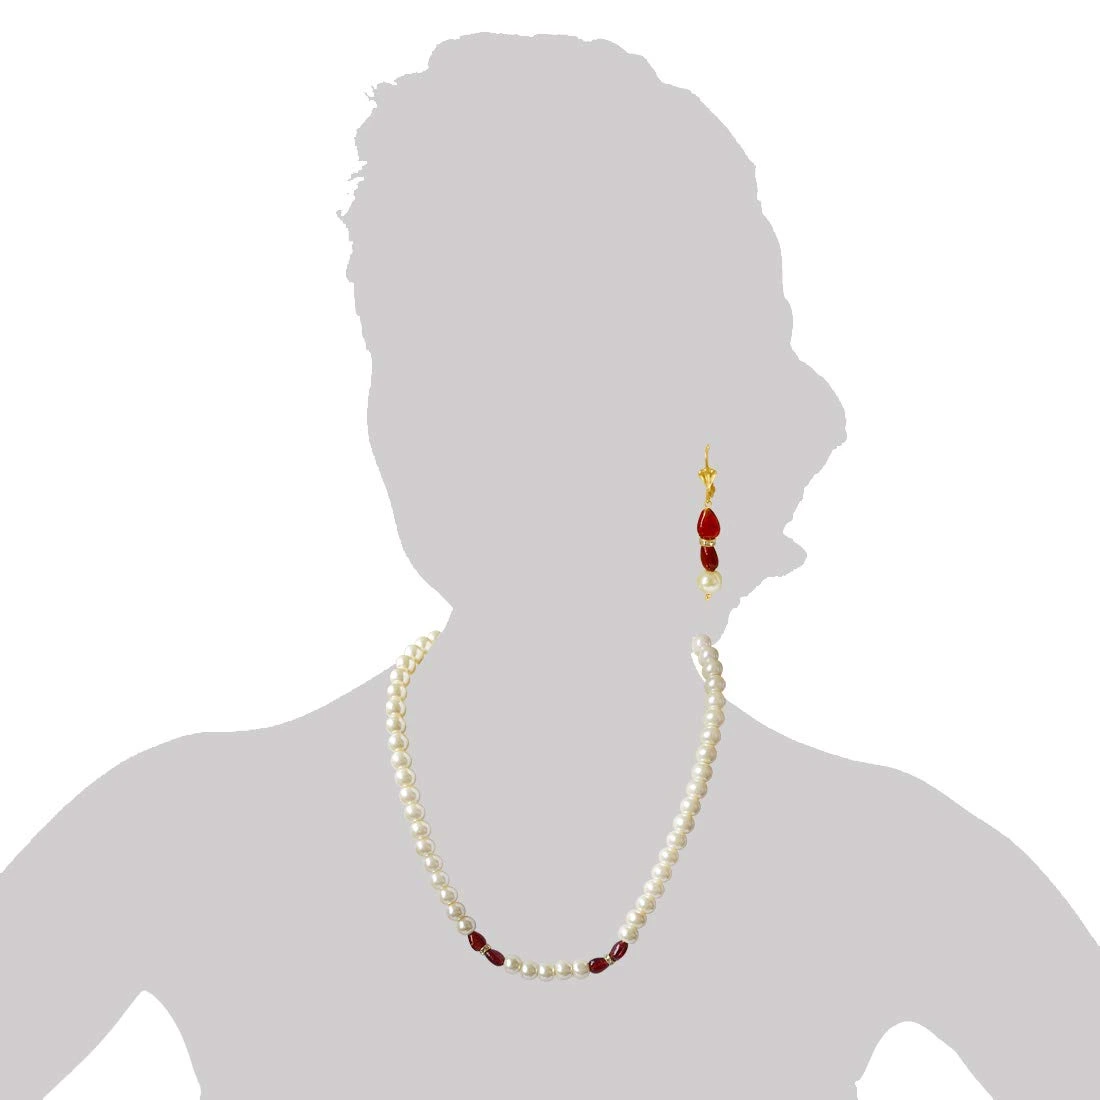 Single Line White Shell Pearl, Oval Shaped Red Stone & Stone Ring Necklace Earring Set PS475